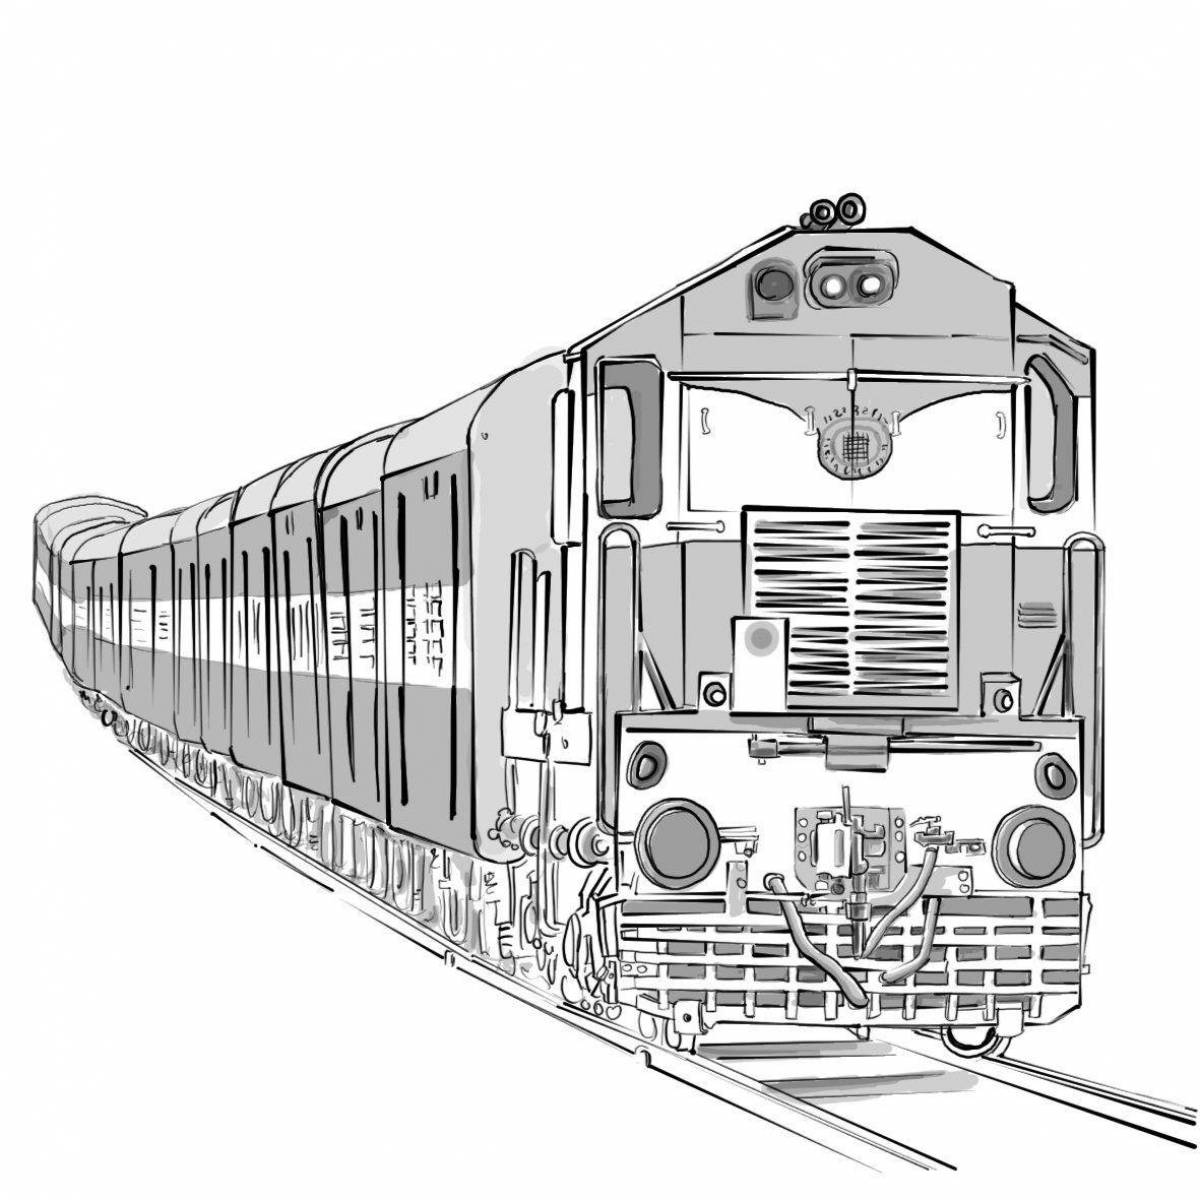 Adorable electric locomotive coloring page for kids